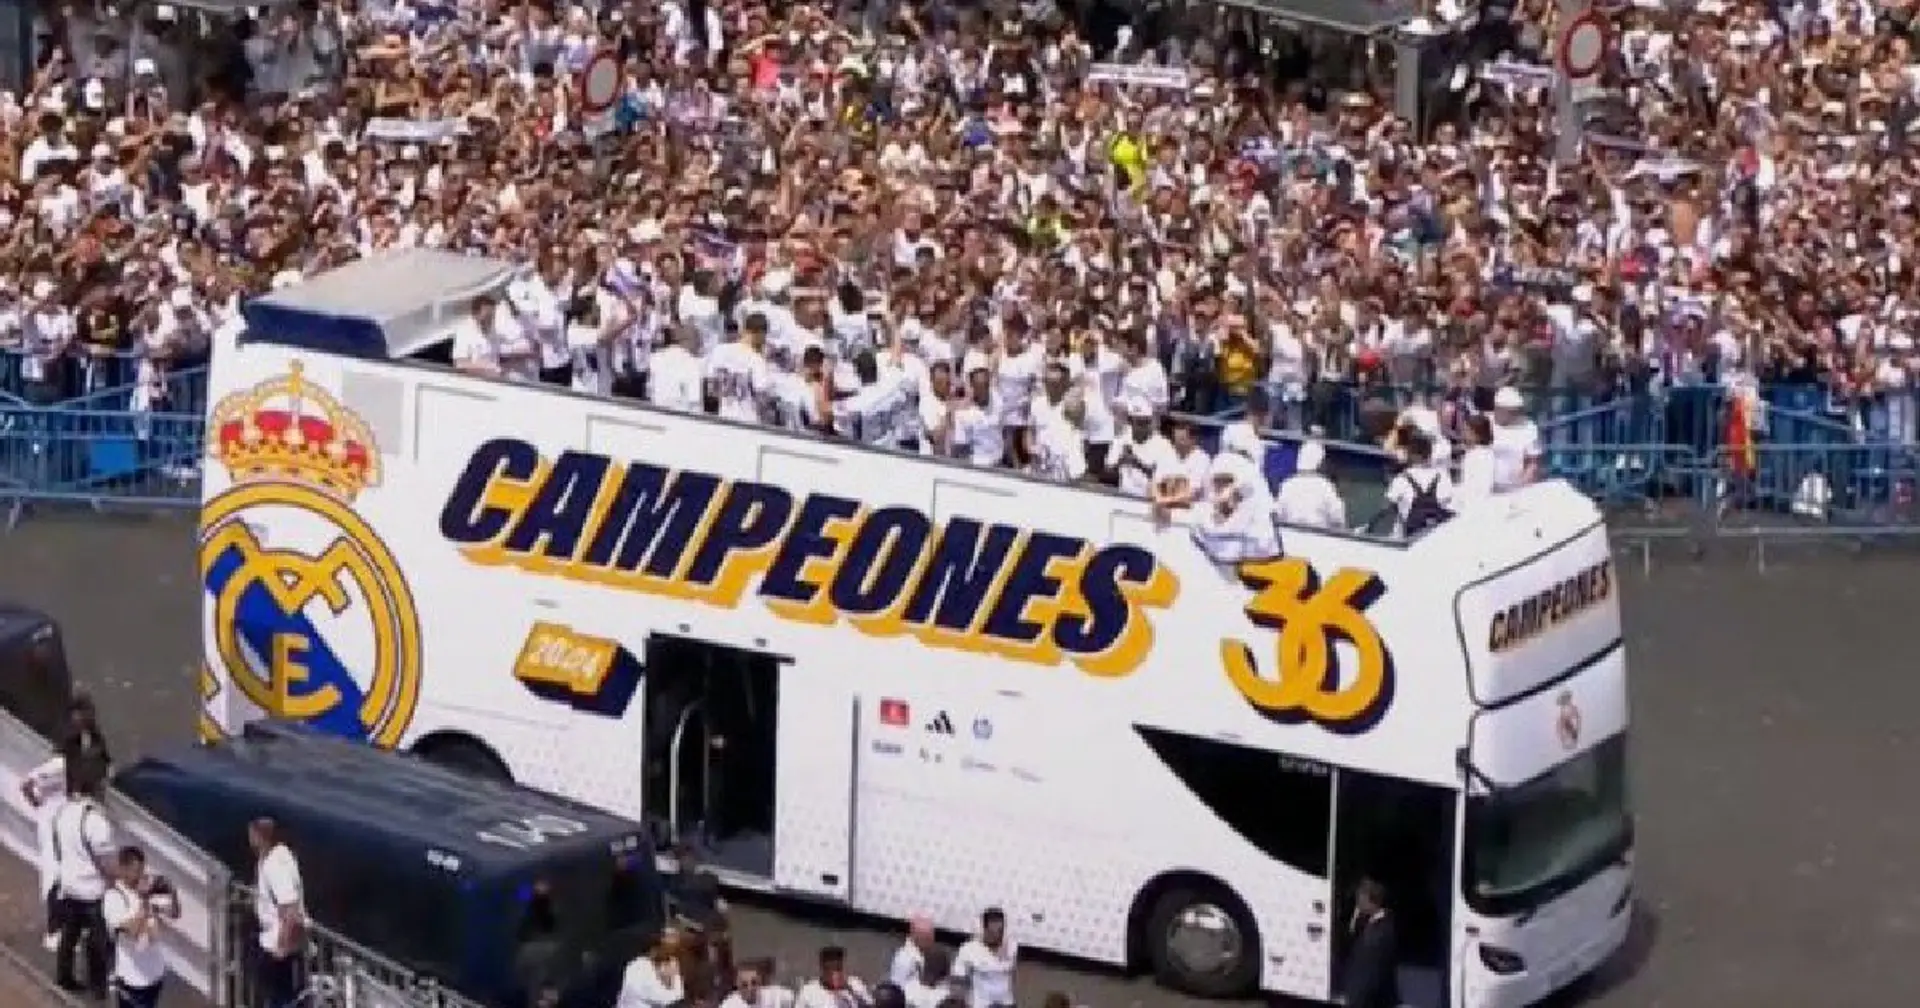 5 best pictures as Real Madrid celebrate La Liga title in style with bus parade